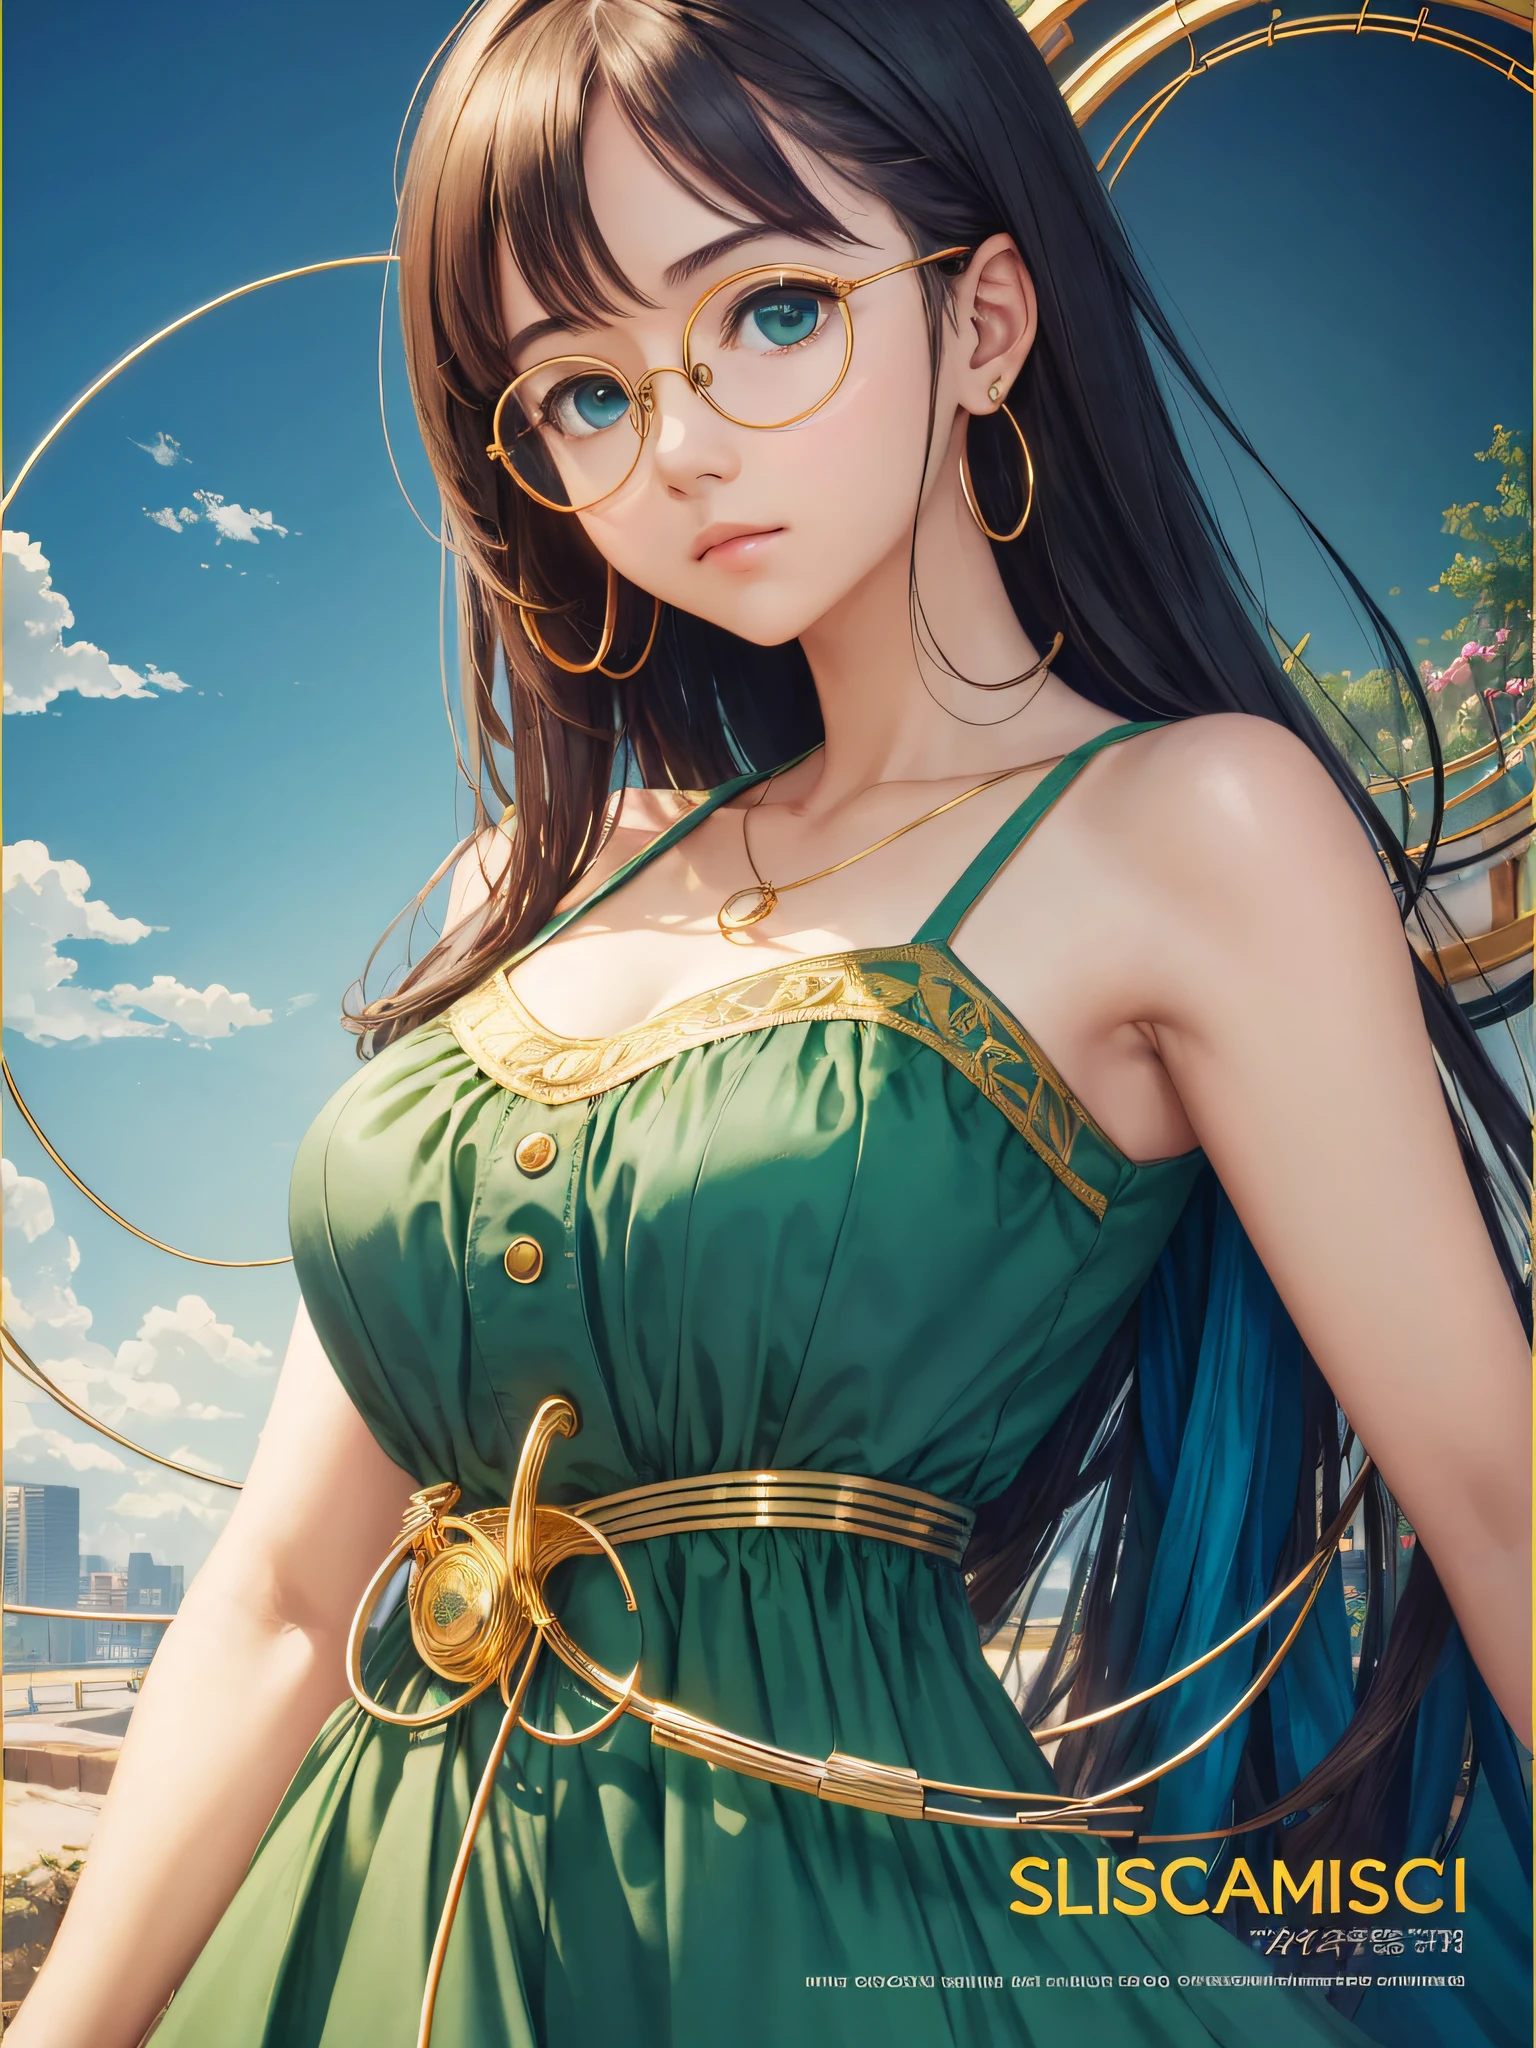 (Masterpiece, highest quality, super large resolution); (CG illustration); (a cute and cute girl); (sleepiness) (exhaustion); ((round-framed gold wire glasses)), (fashionable) (trendy); Rich colors, cyan, orange, yellow, green, cyan, blue, purple, fashion typography, magazine cover poster, hyper-detail, art, title, logo, label, badge, graphic design, detail post-processing, depth of field, high brightness, high saturation, more white space;